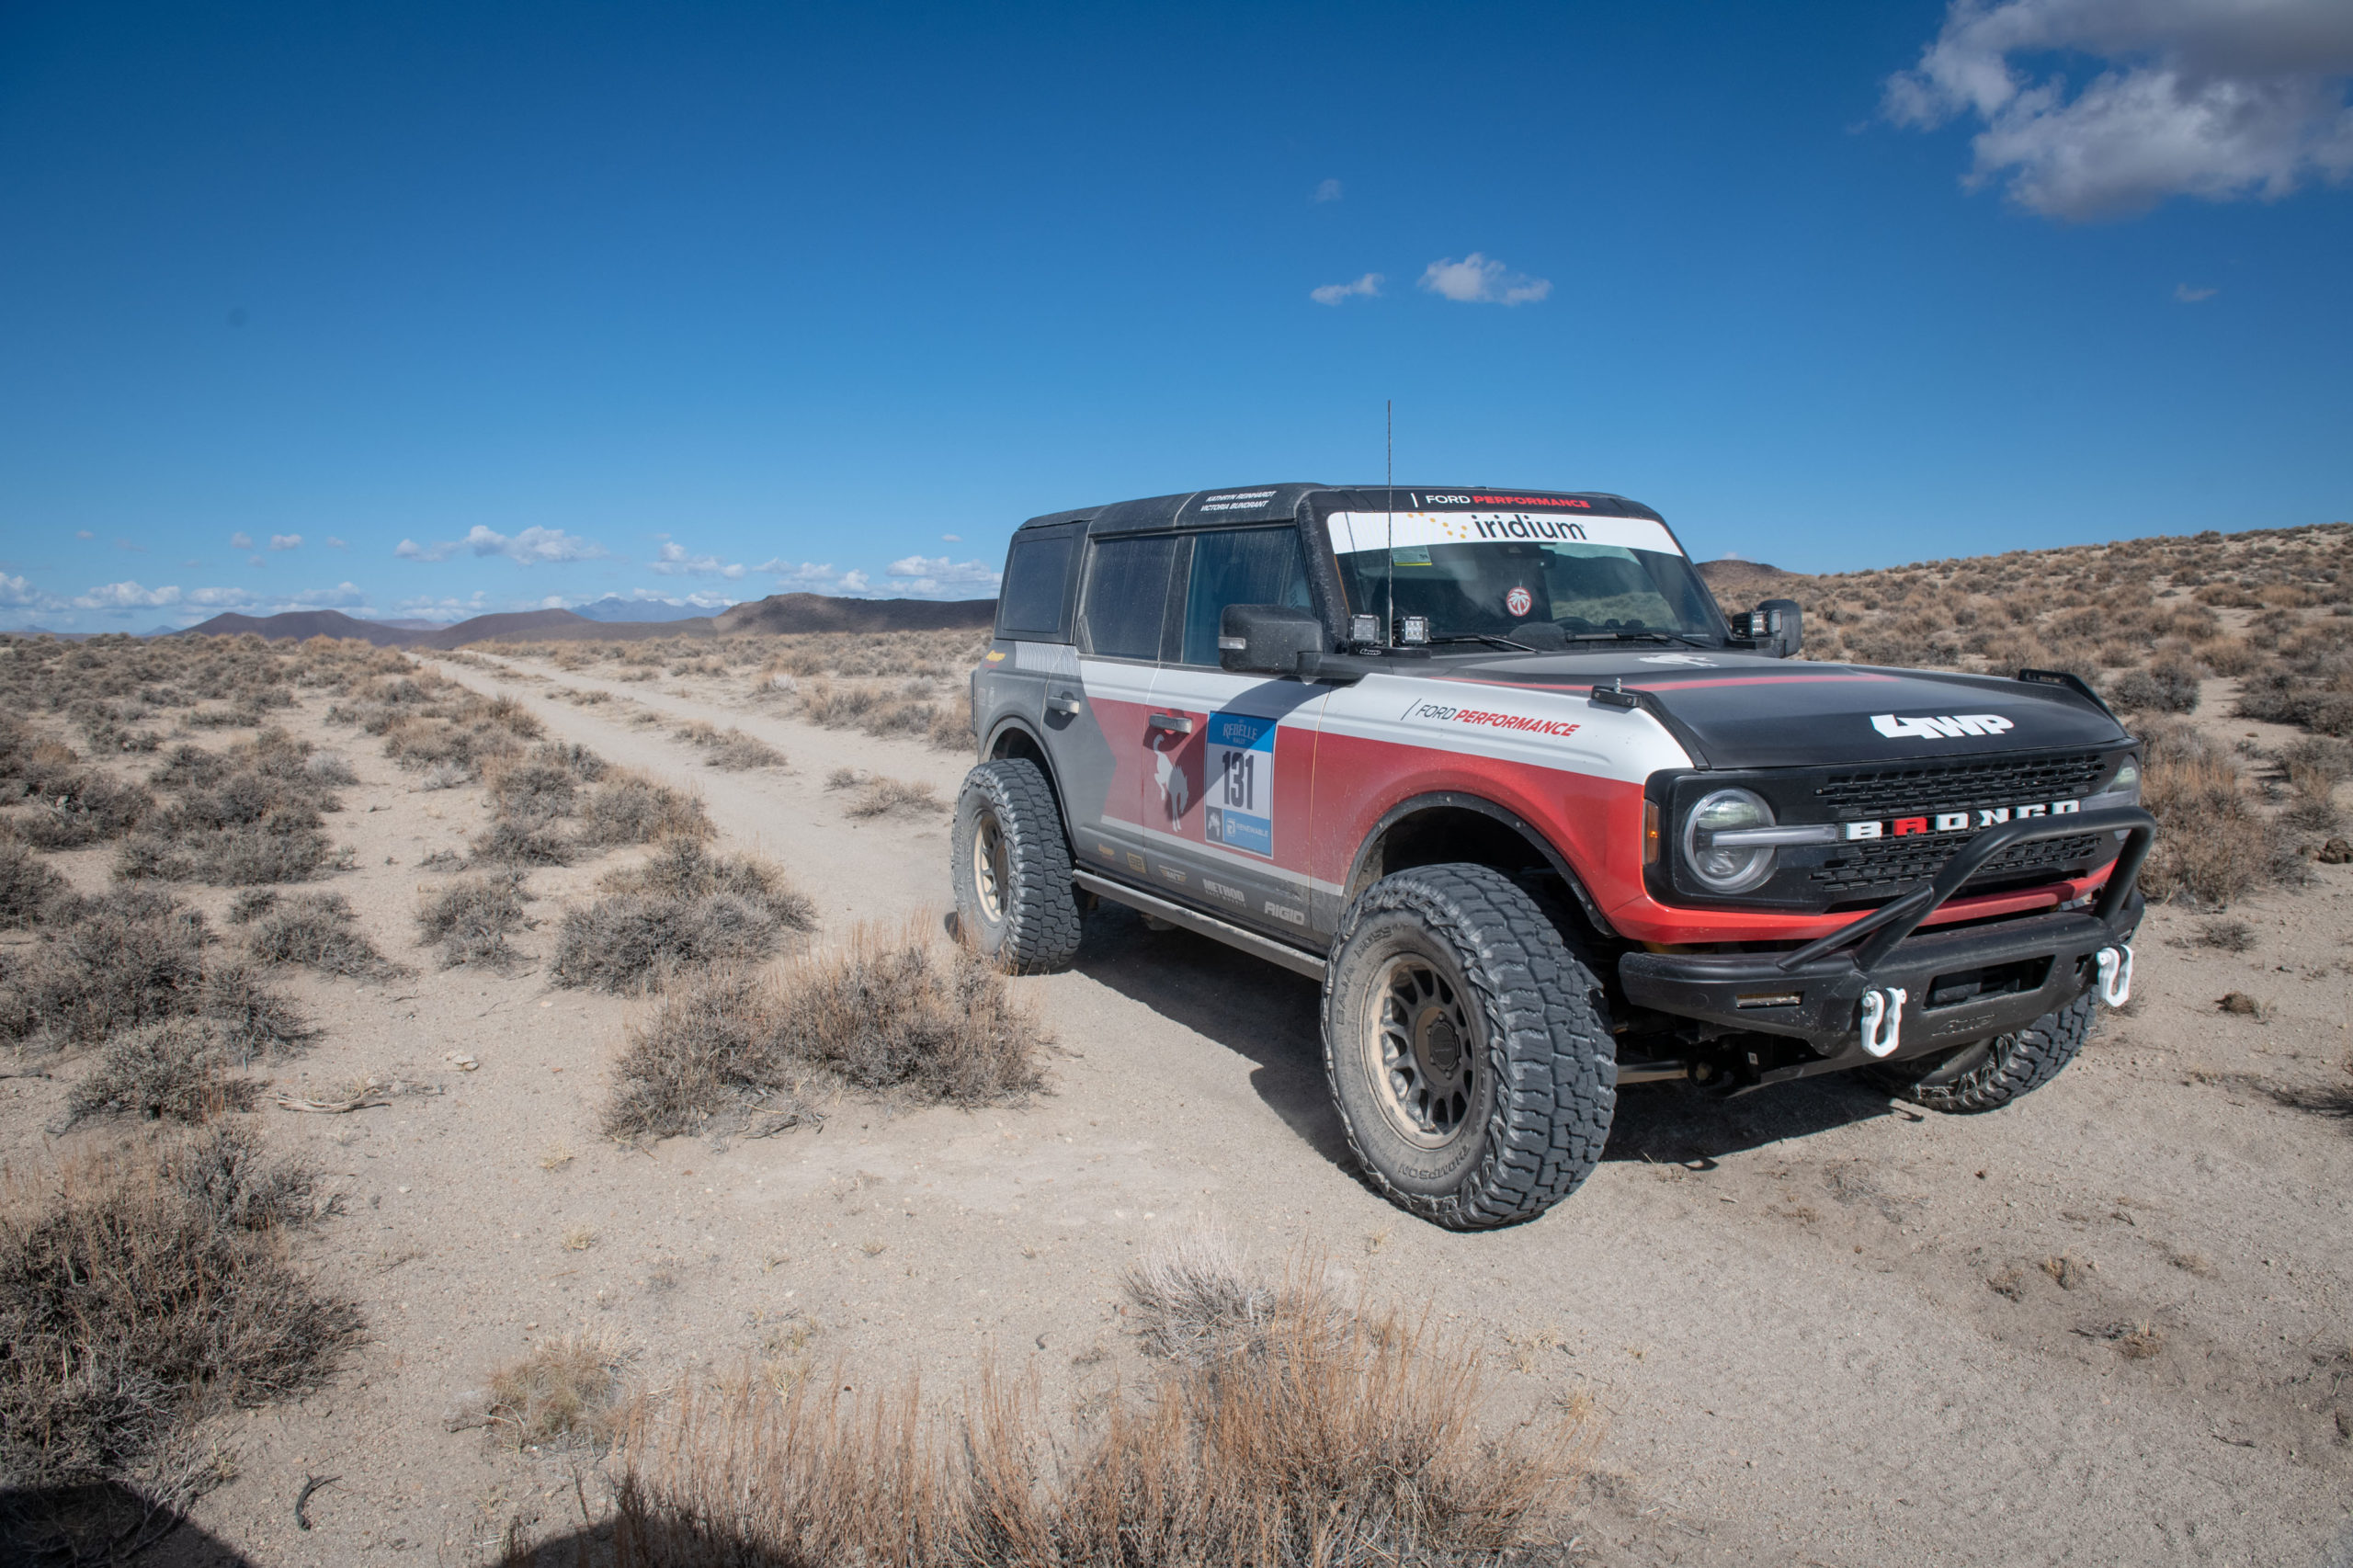 4 Wheel Parts Team Completes Rebelle Rally | THE SHOP